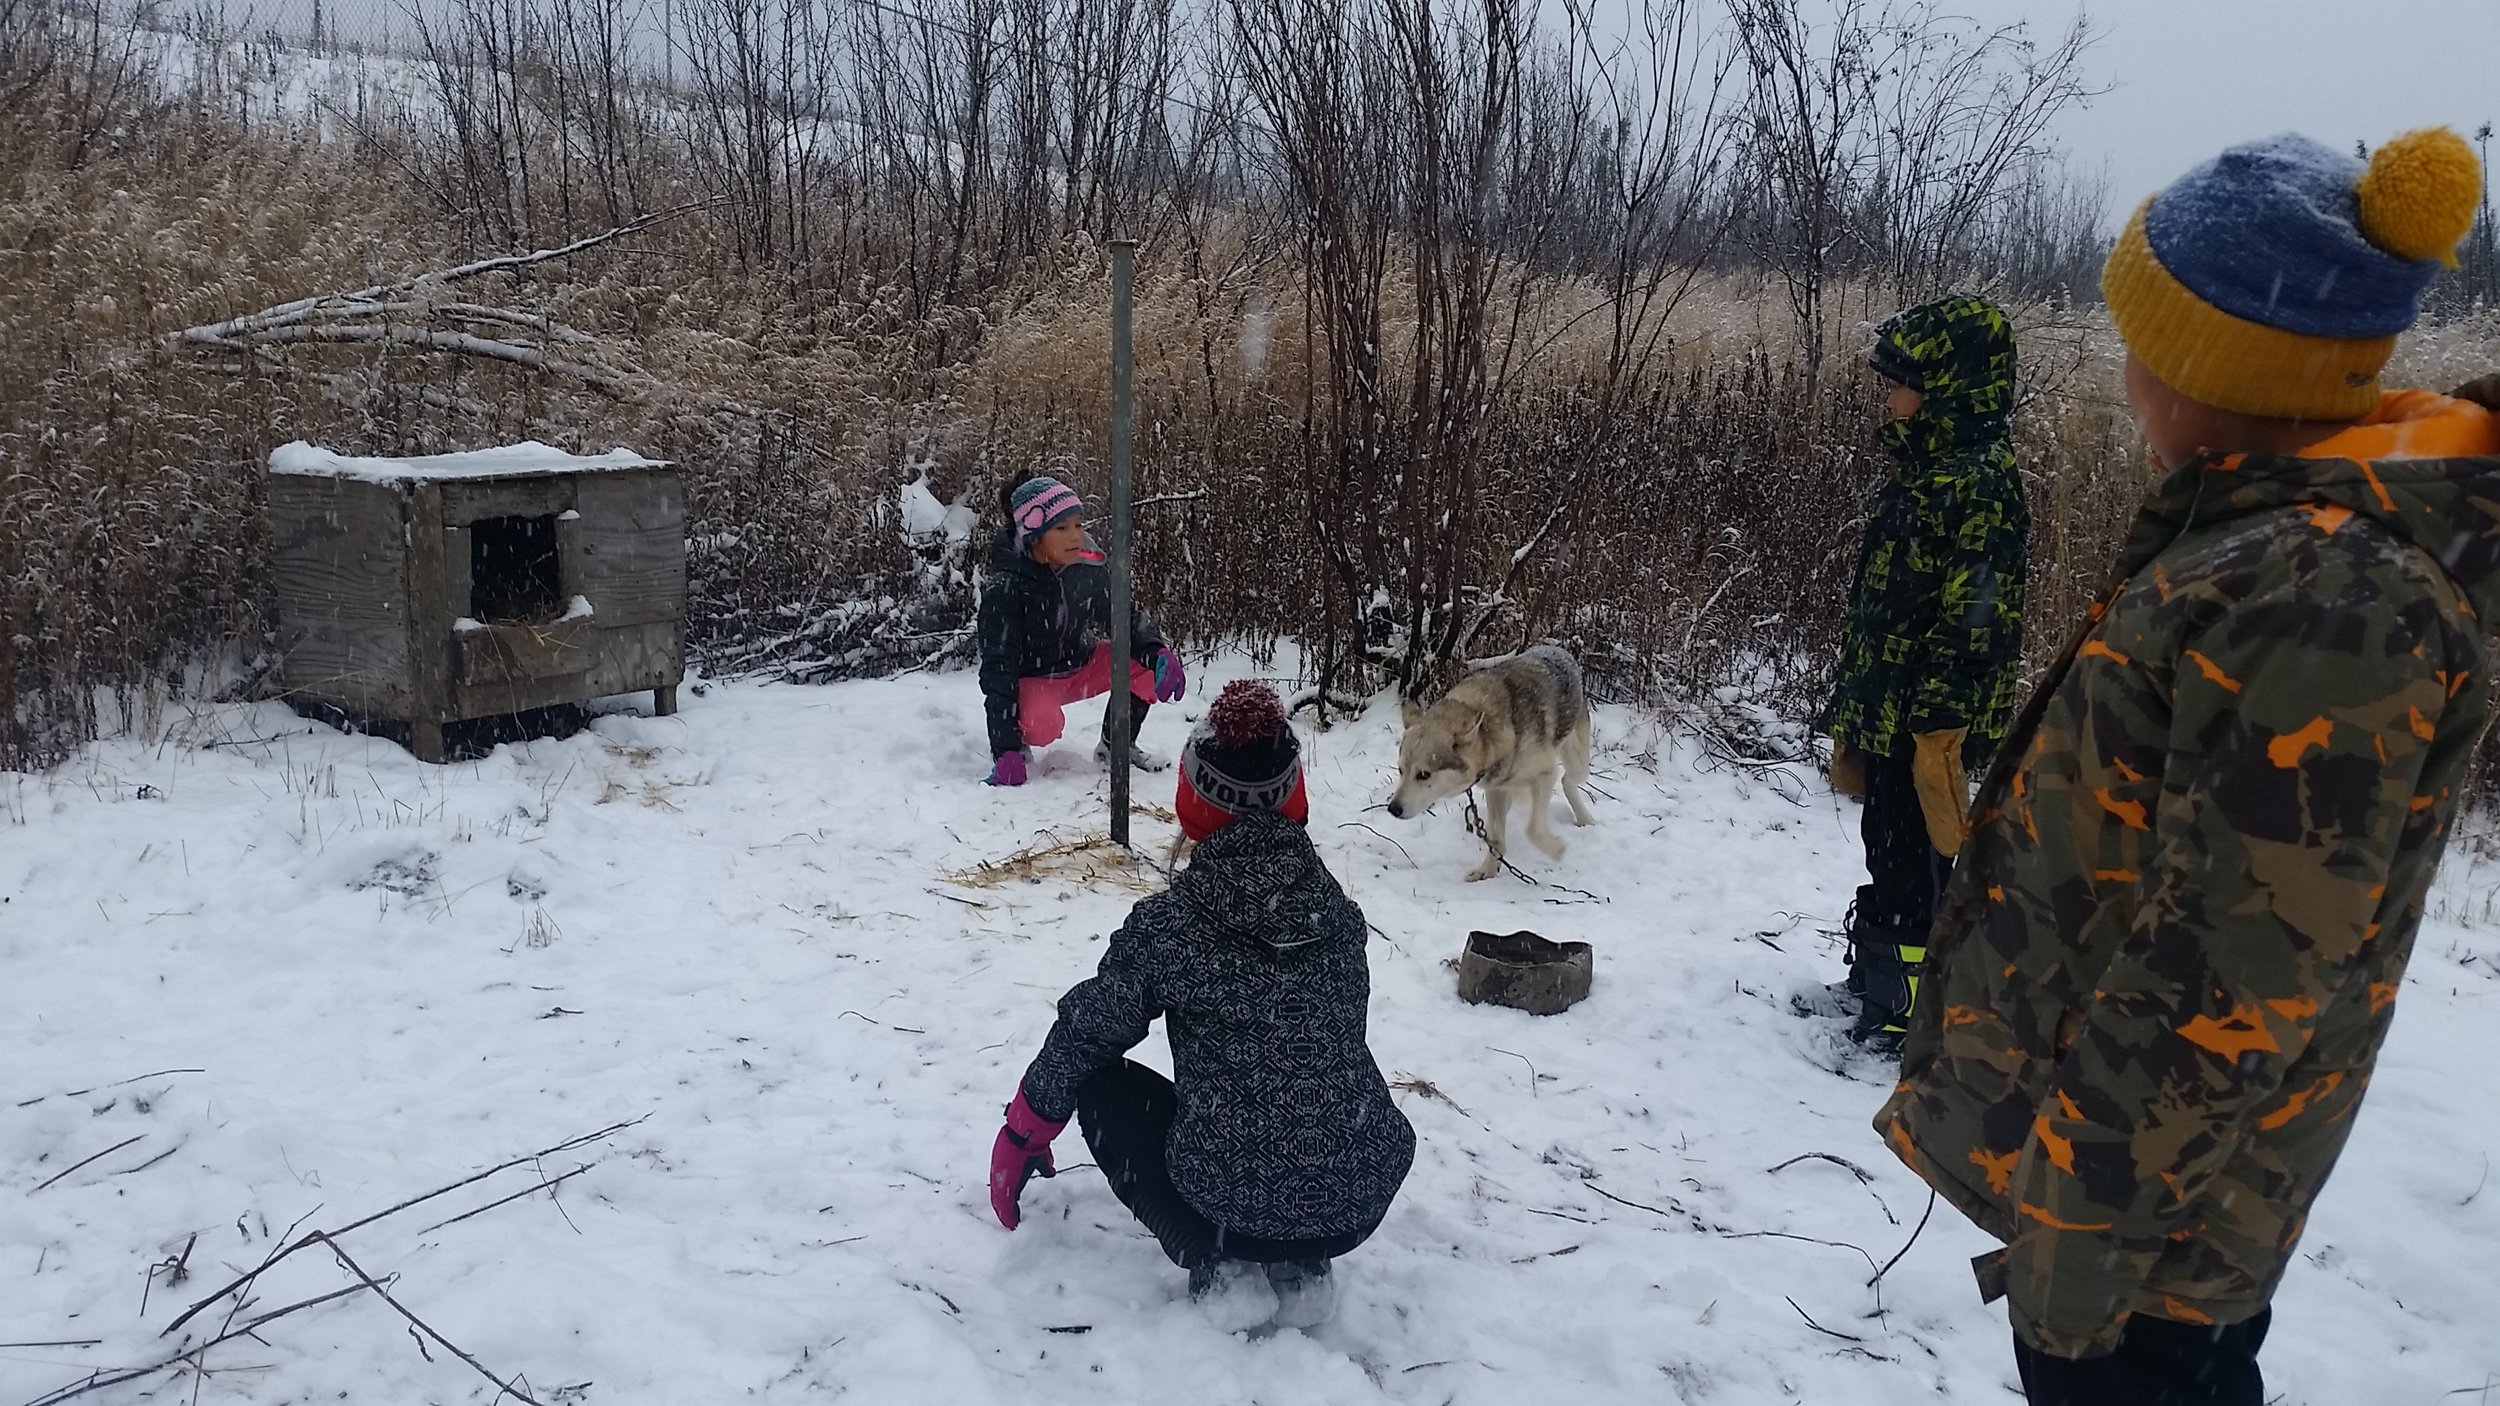 Students trying to make friends with a shy sled dog.